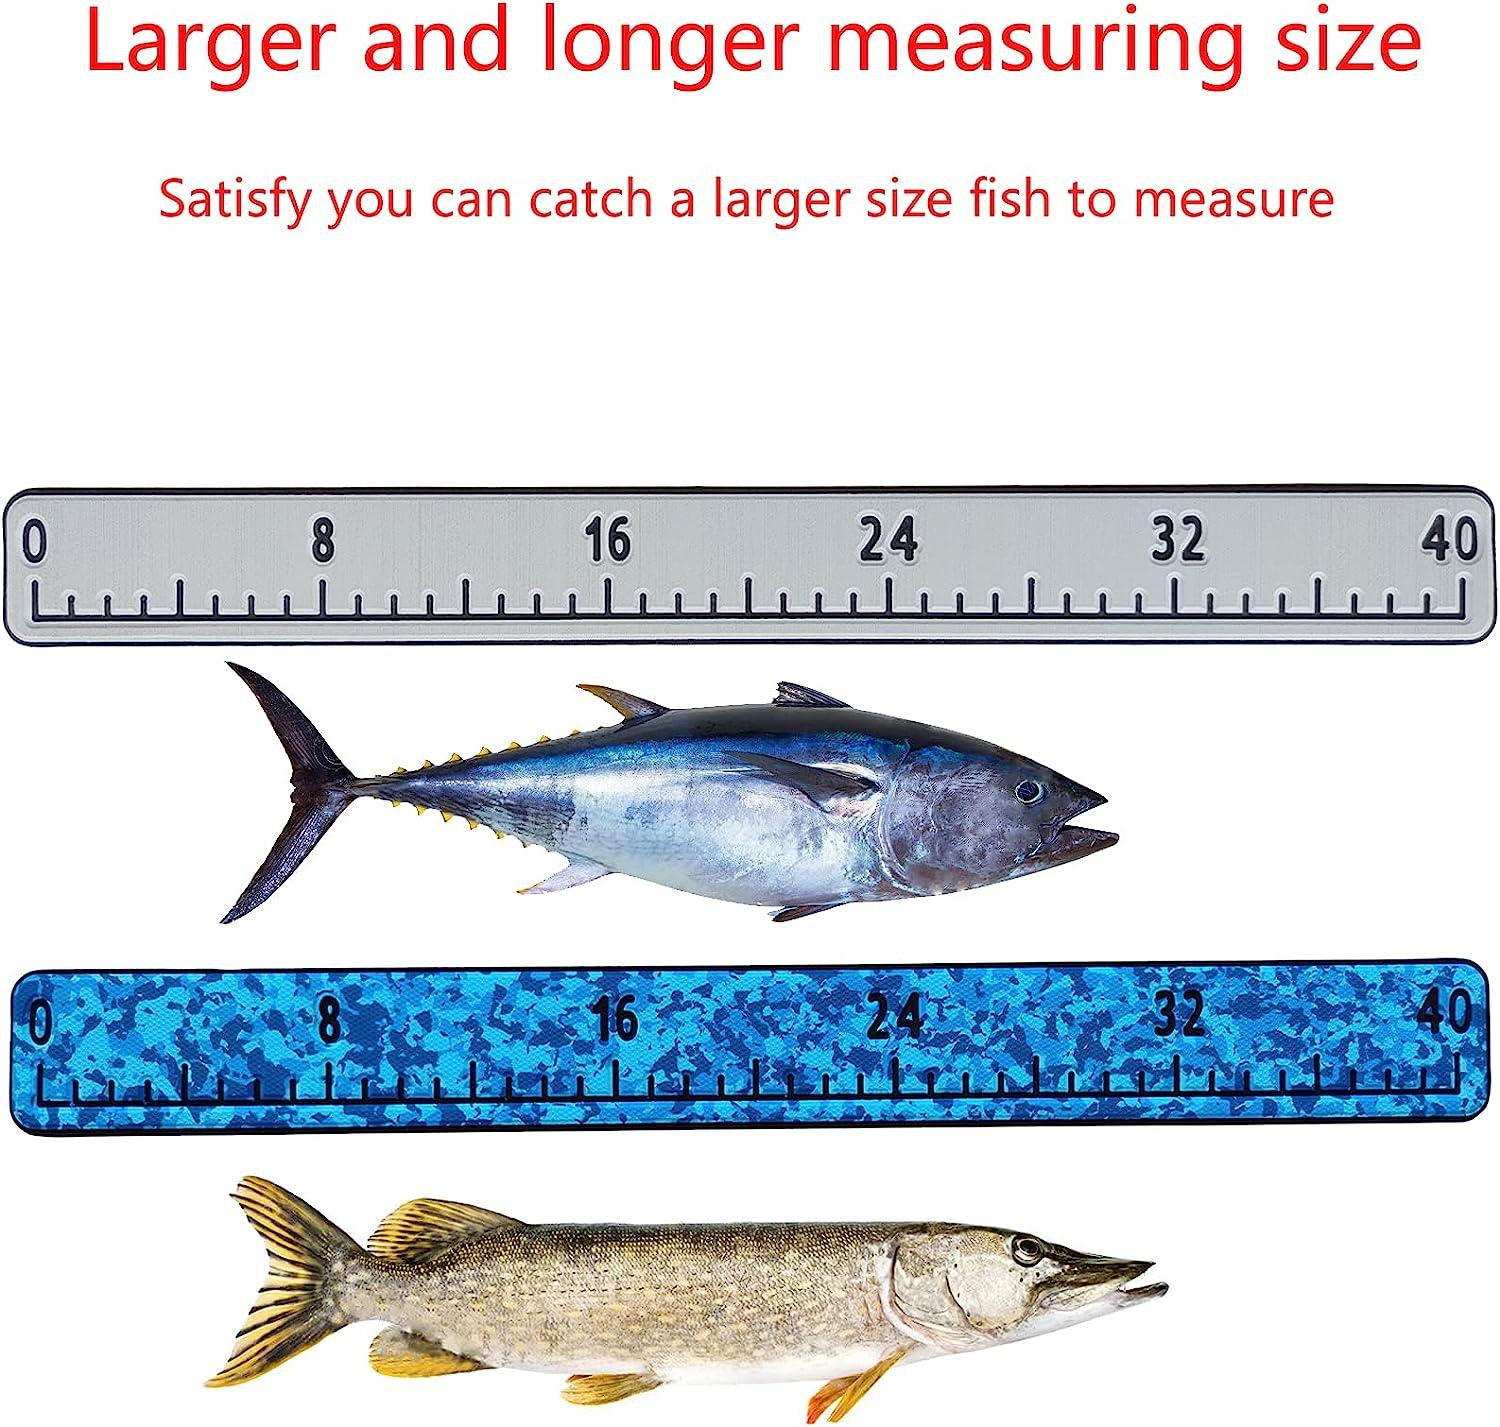 Hzkaicun/Fish Ruler/40/with Backing Adhesive/Fish Measuring Sticker/Foam  Fish Ruler for Boat/Fish Measuring Board/Suitable for/Fish  Boat/Cooler/Kayak/Yacht/Fish Ruler Boat Accessories 40 Light gray